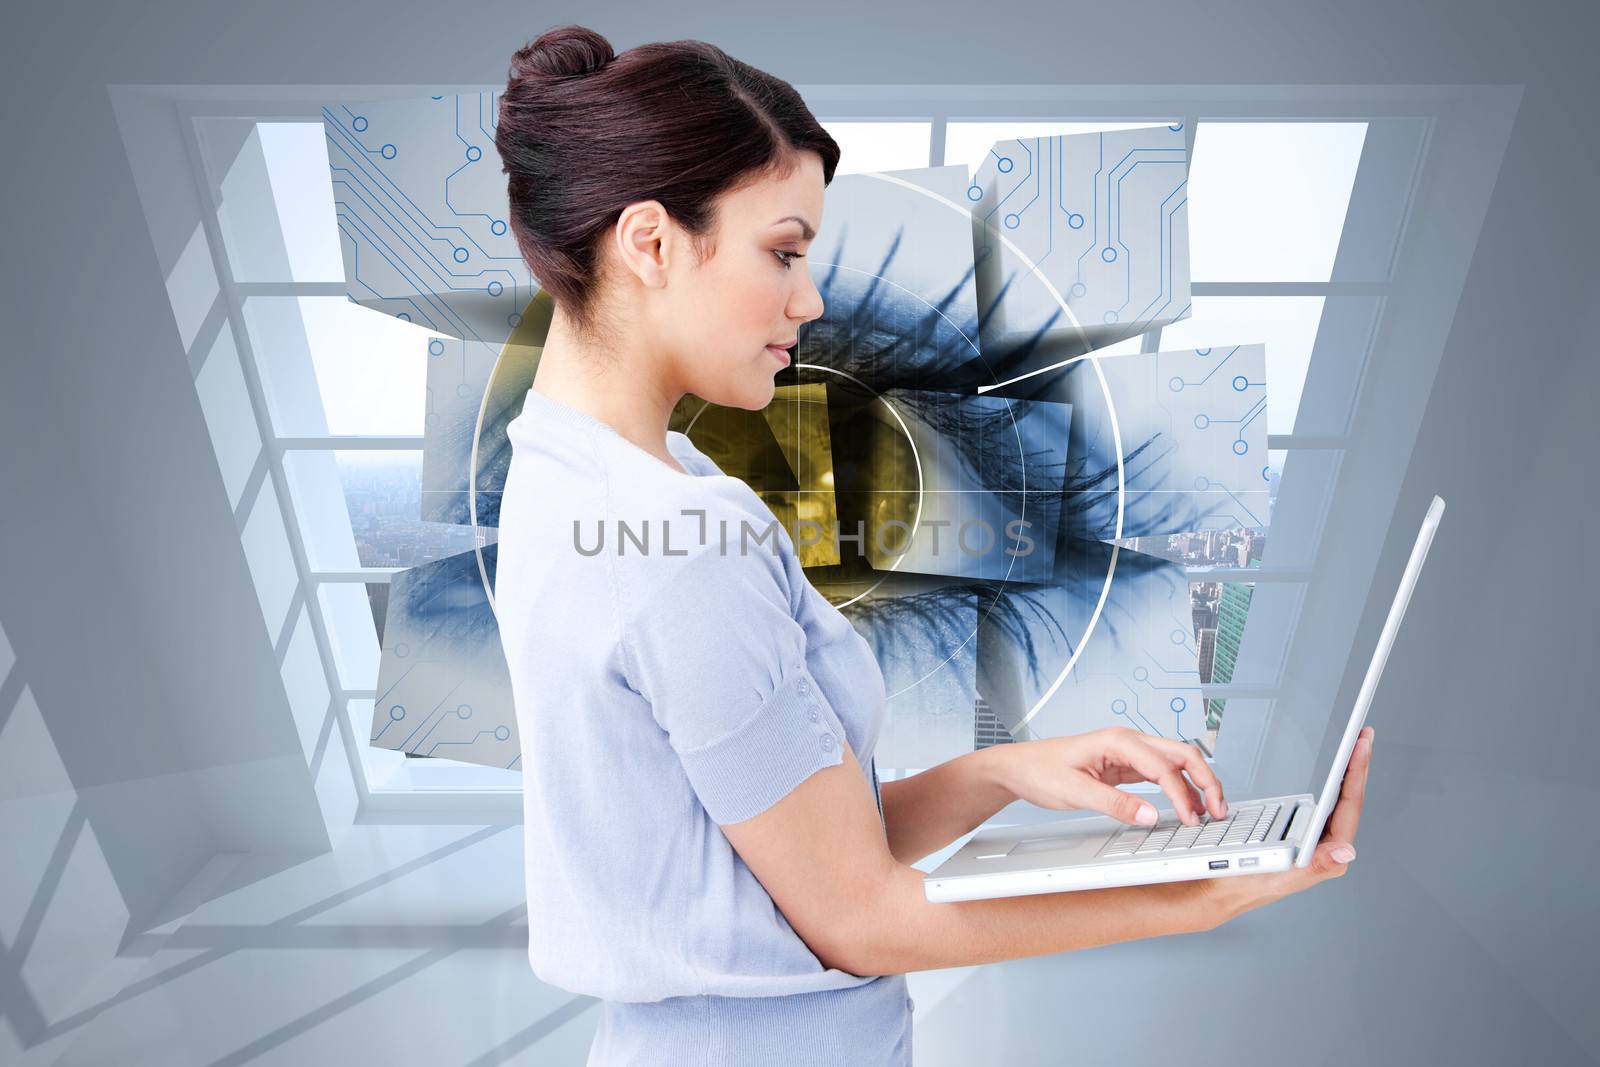 Confident businesswoman using a laptop against room with large window showing city